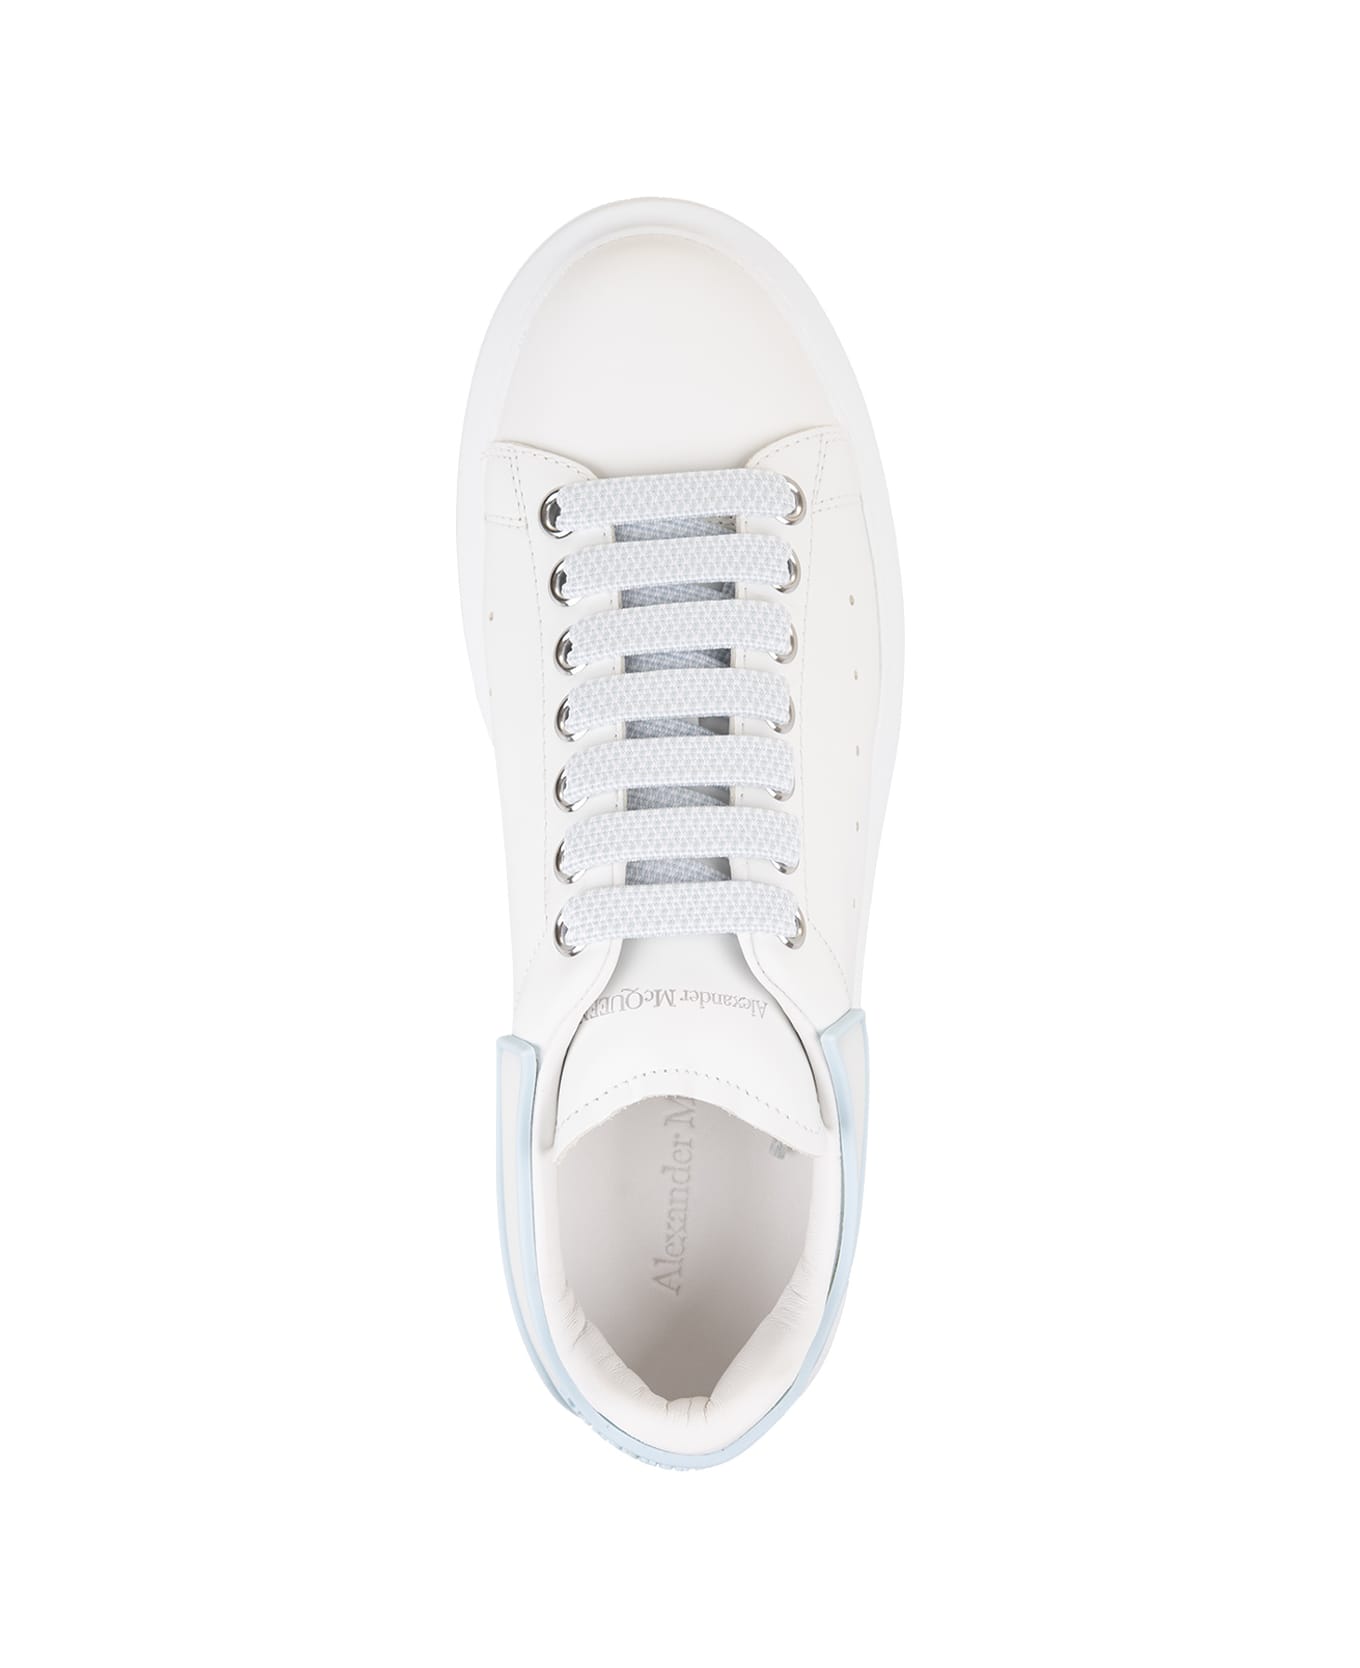 Alexander McQueen White Oversized Sneakers With Powder Blue Details - White スニーカー